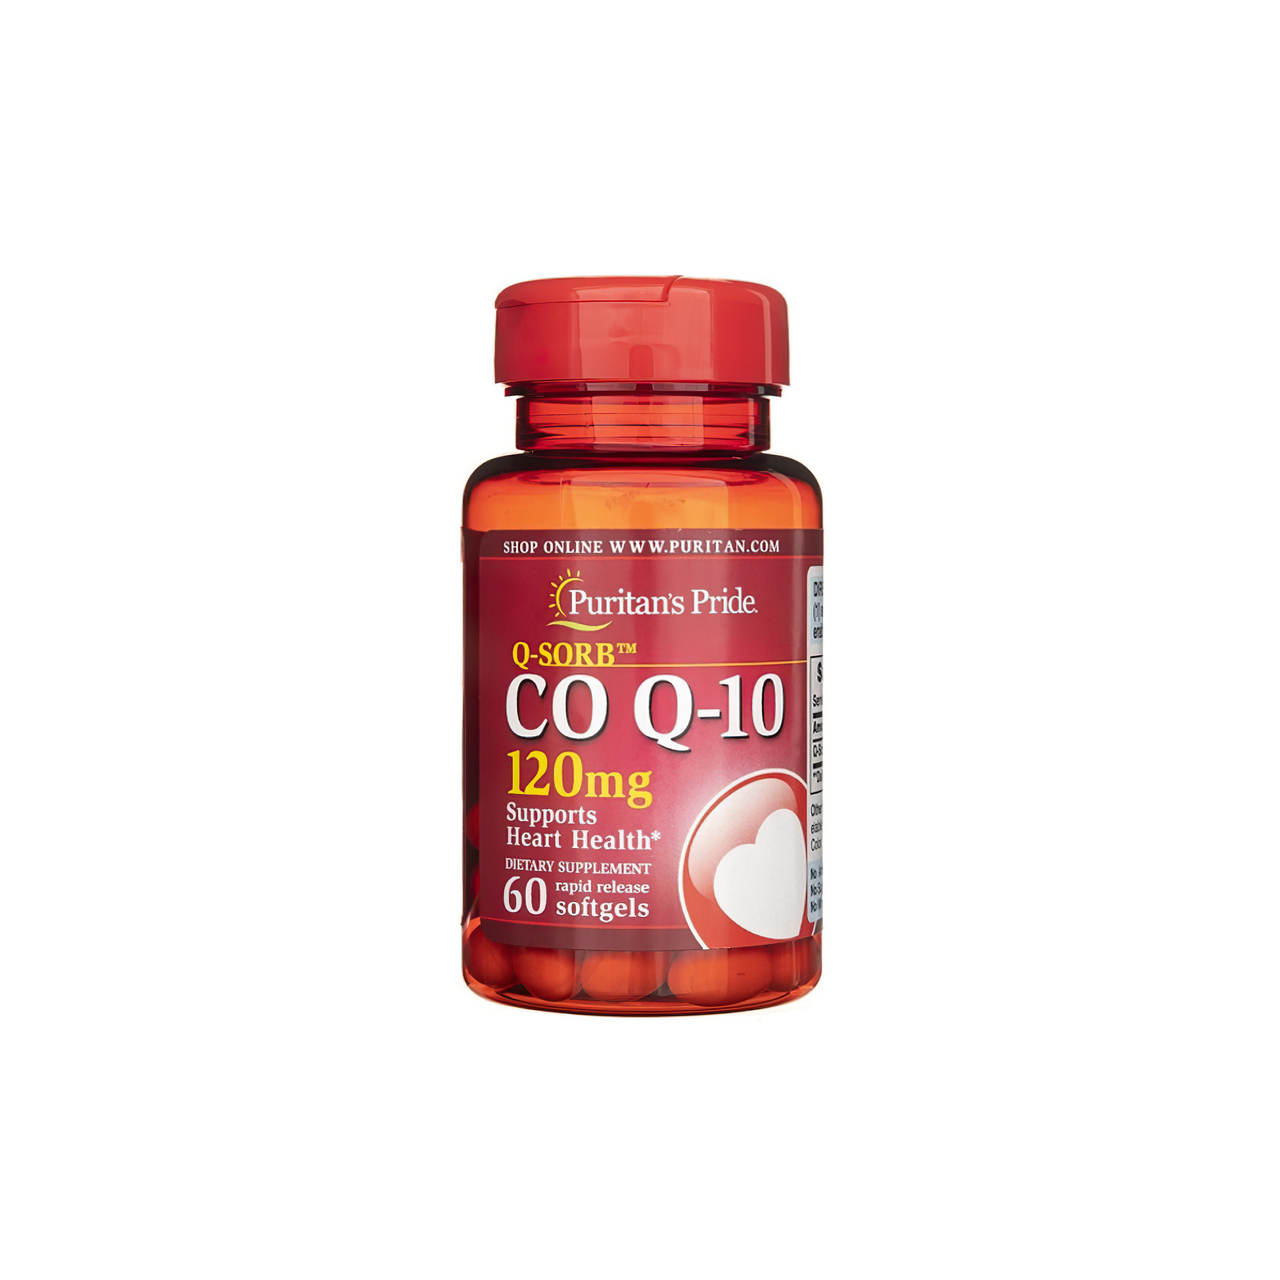 A bottle of Puritan's Pride Coenzyme Q10 - 120 mg 60 Rapid Release softgels.